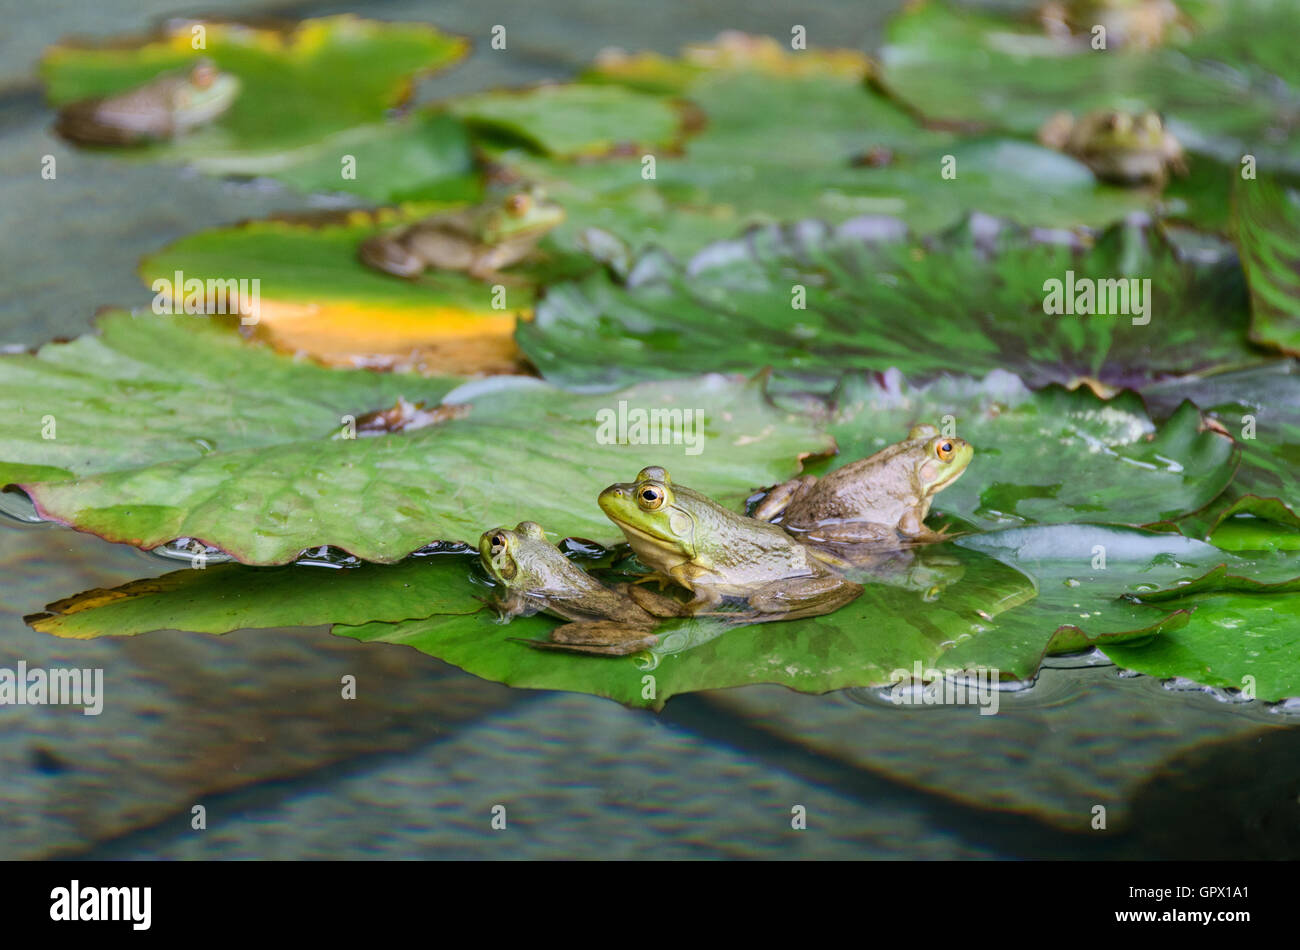 Six Green Frogs (Rana clamitans melanota) on lily pads in a garden pool, Mount Desert Island, Maine. Stock Photo